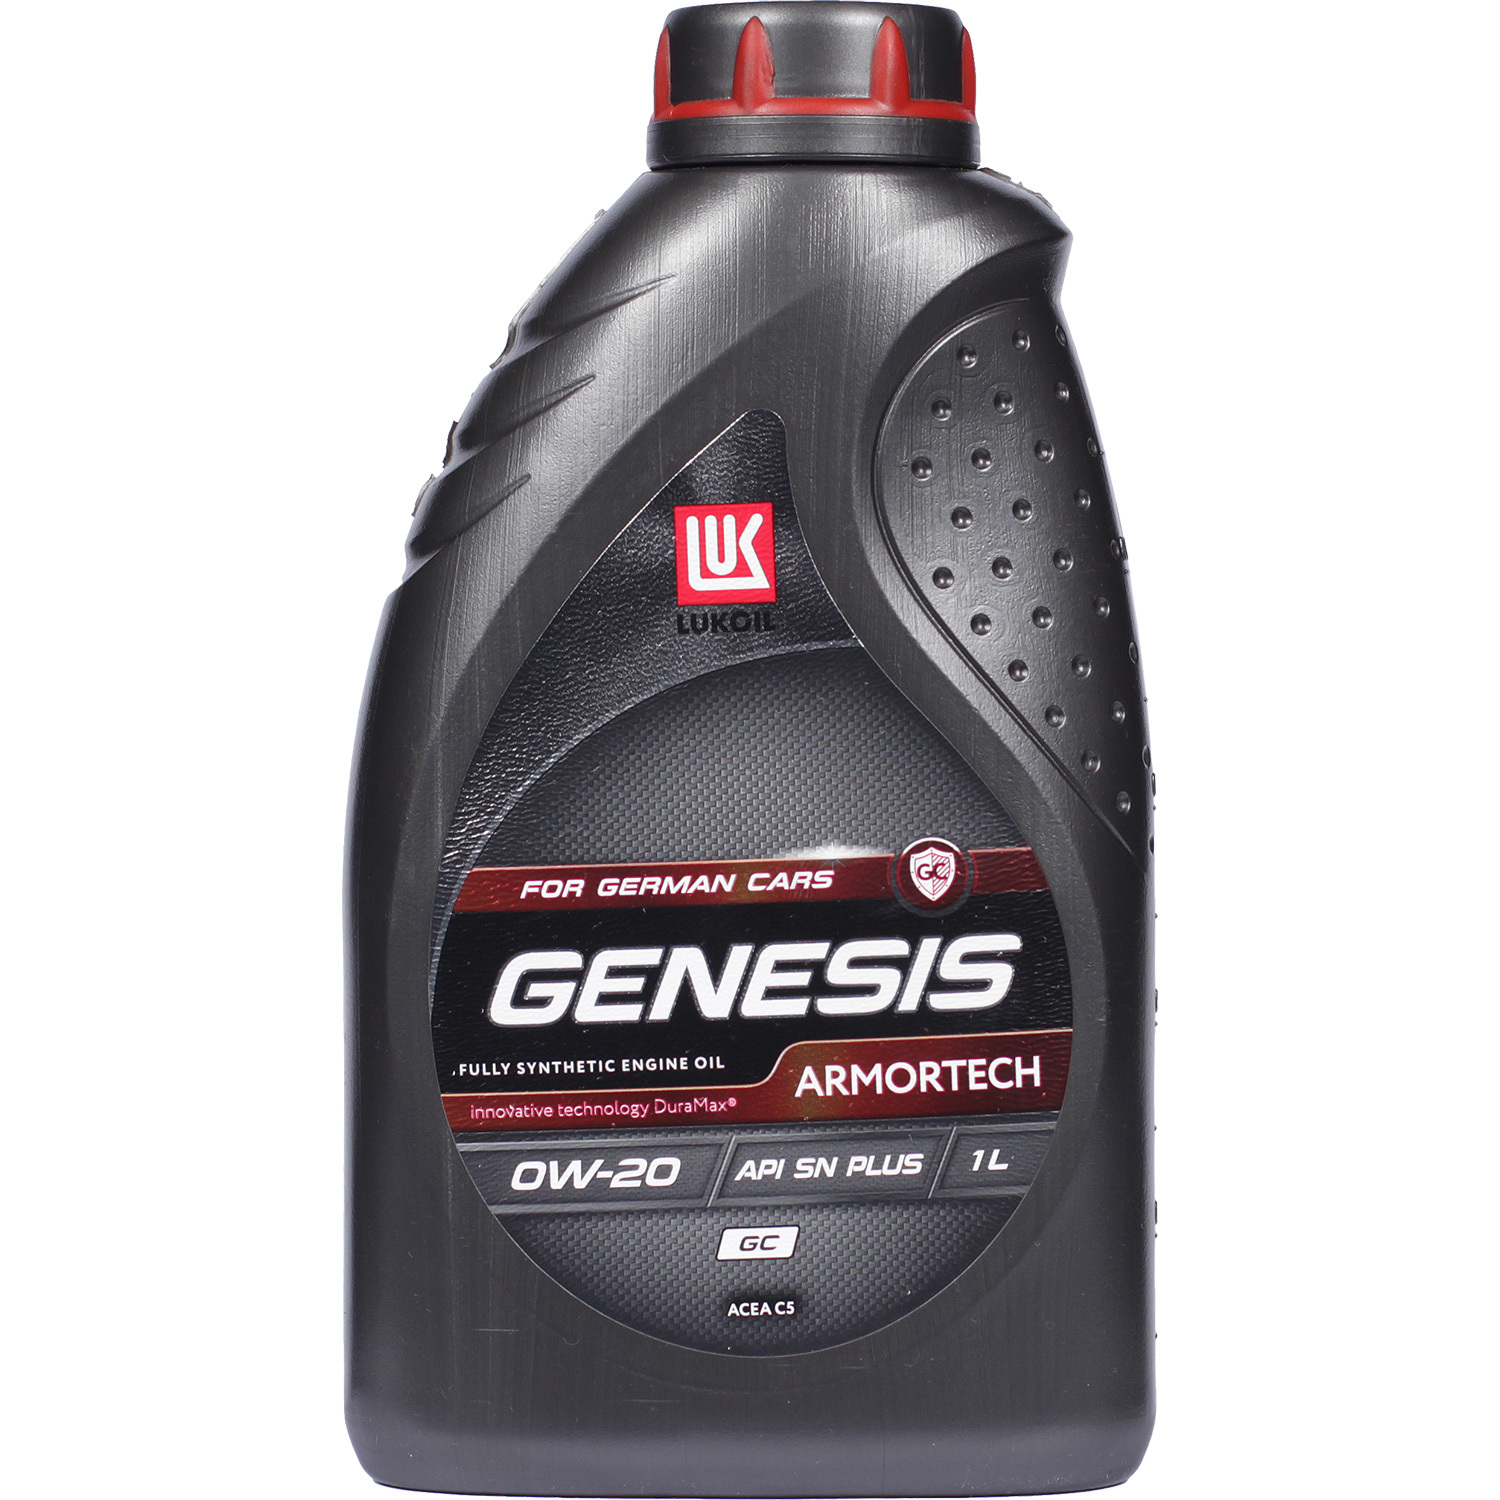 Lukoil Моторное масло Lukoil Genesis Armortech GC 0W-20, 1 л lukoil моторное масло lukoil genesis armortech 0w 40 1 л